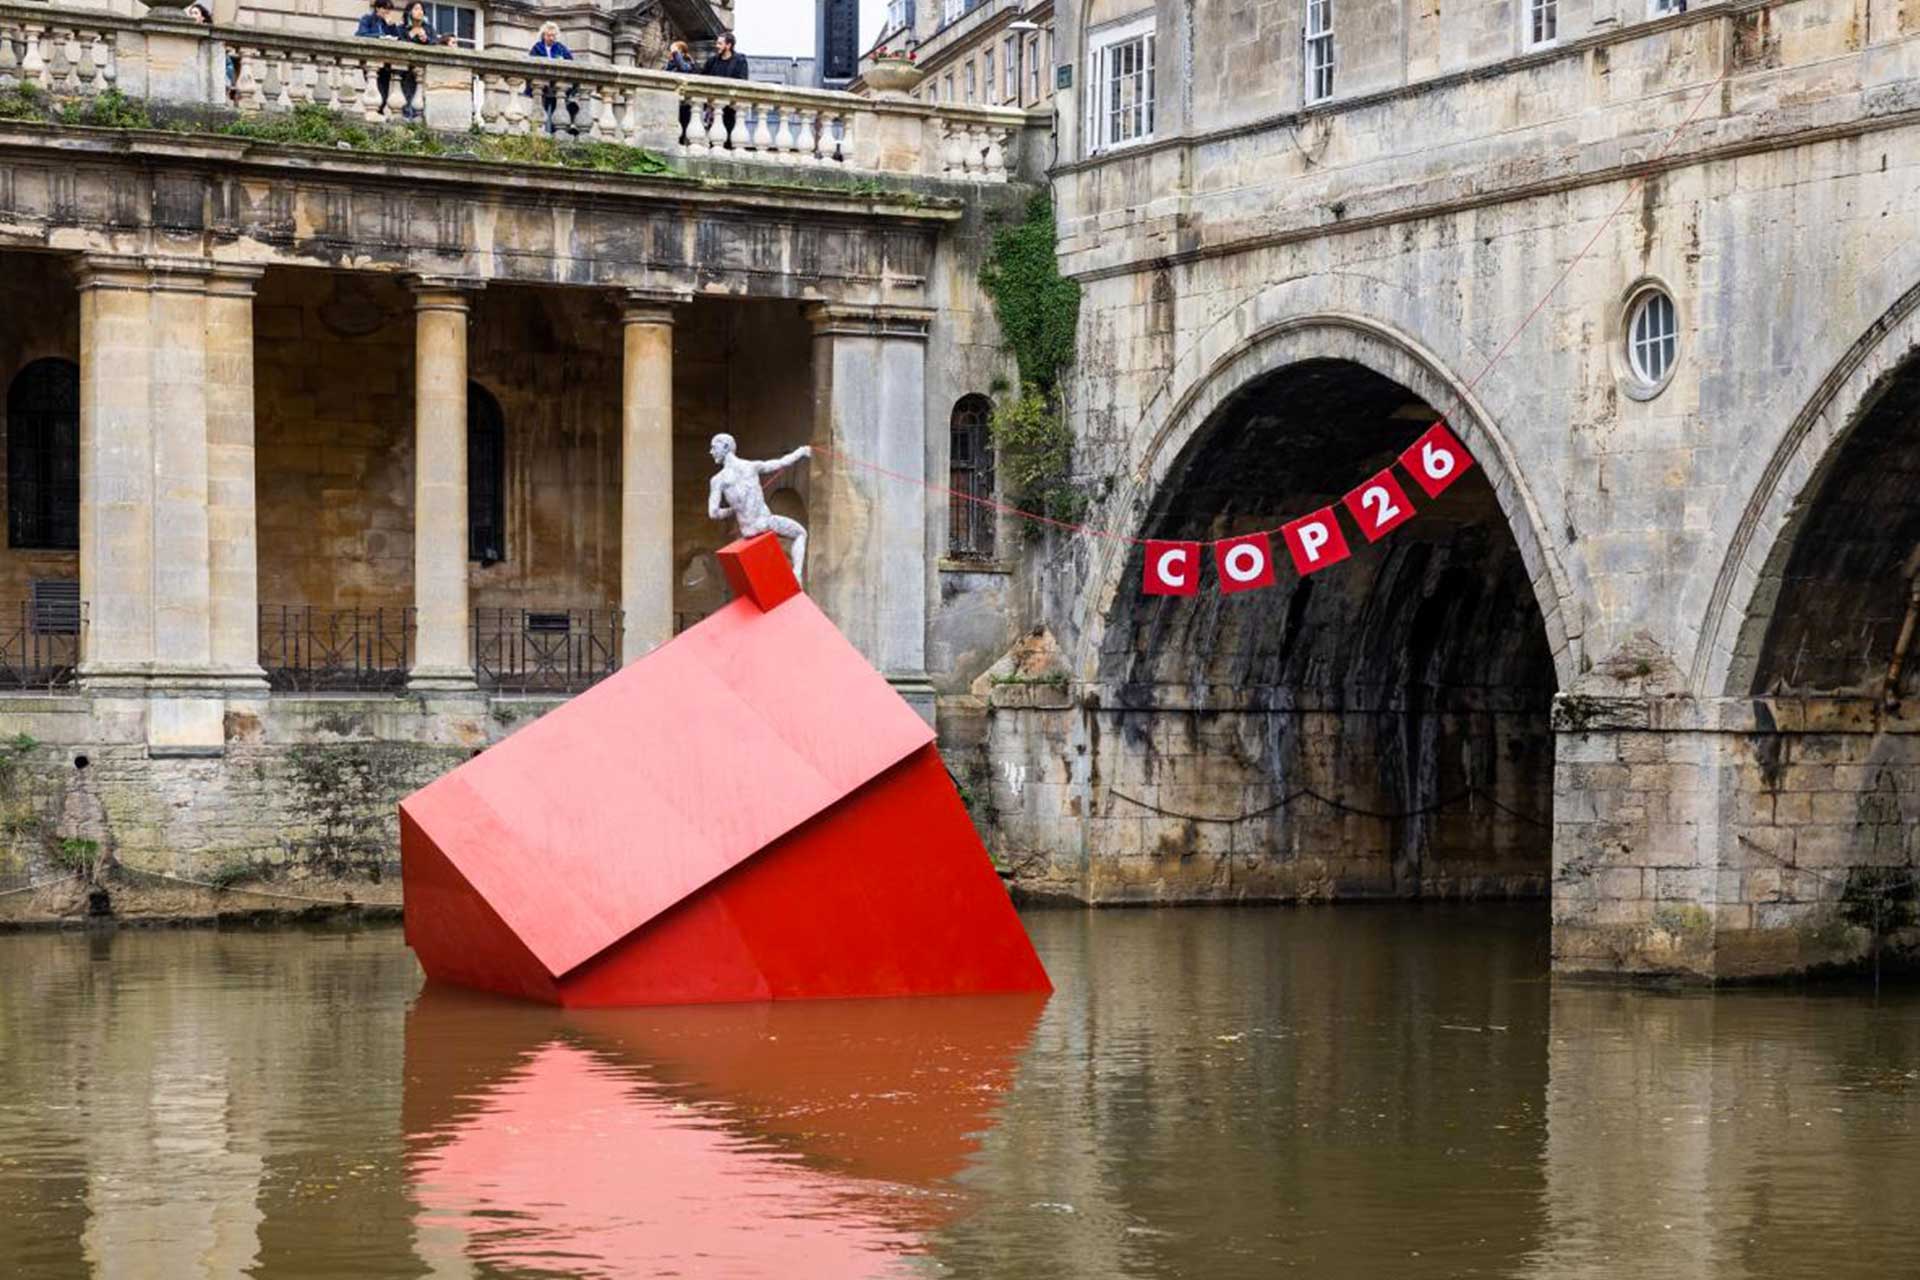 An installation of a 'Sinking House' partly submerged to highlight climate change ahead of COP26, in Bath, Britain, Oct. 26, 2021, image somersetcountygazette